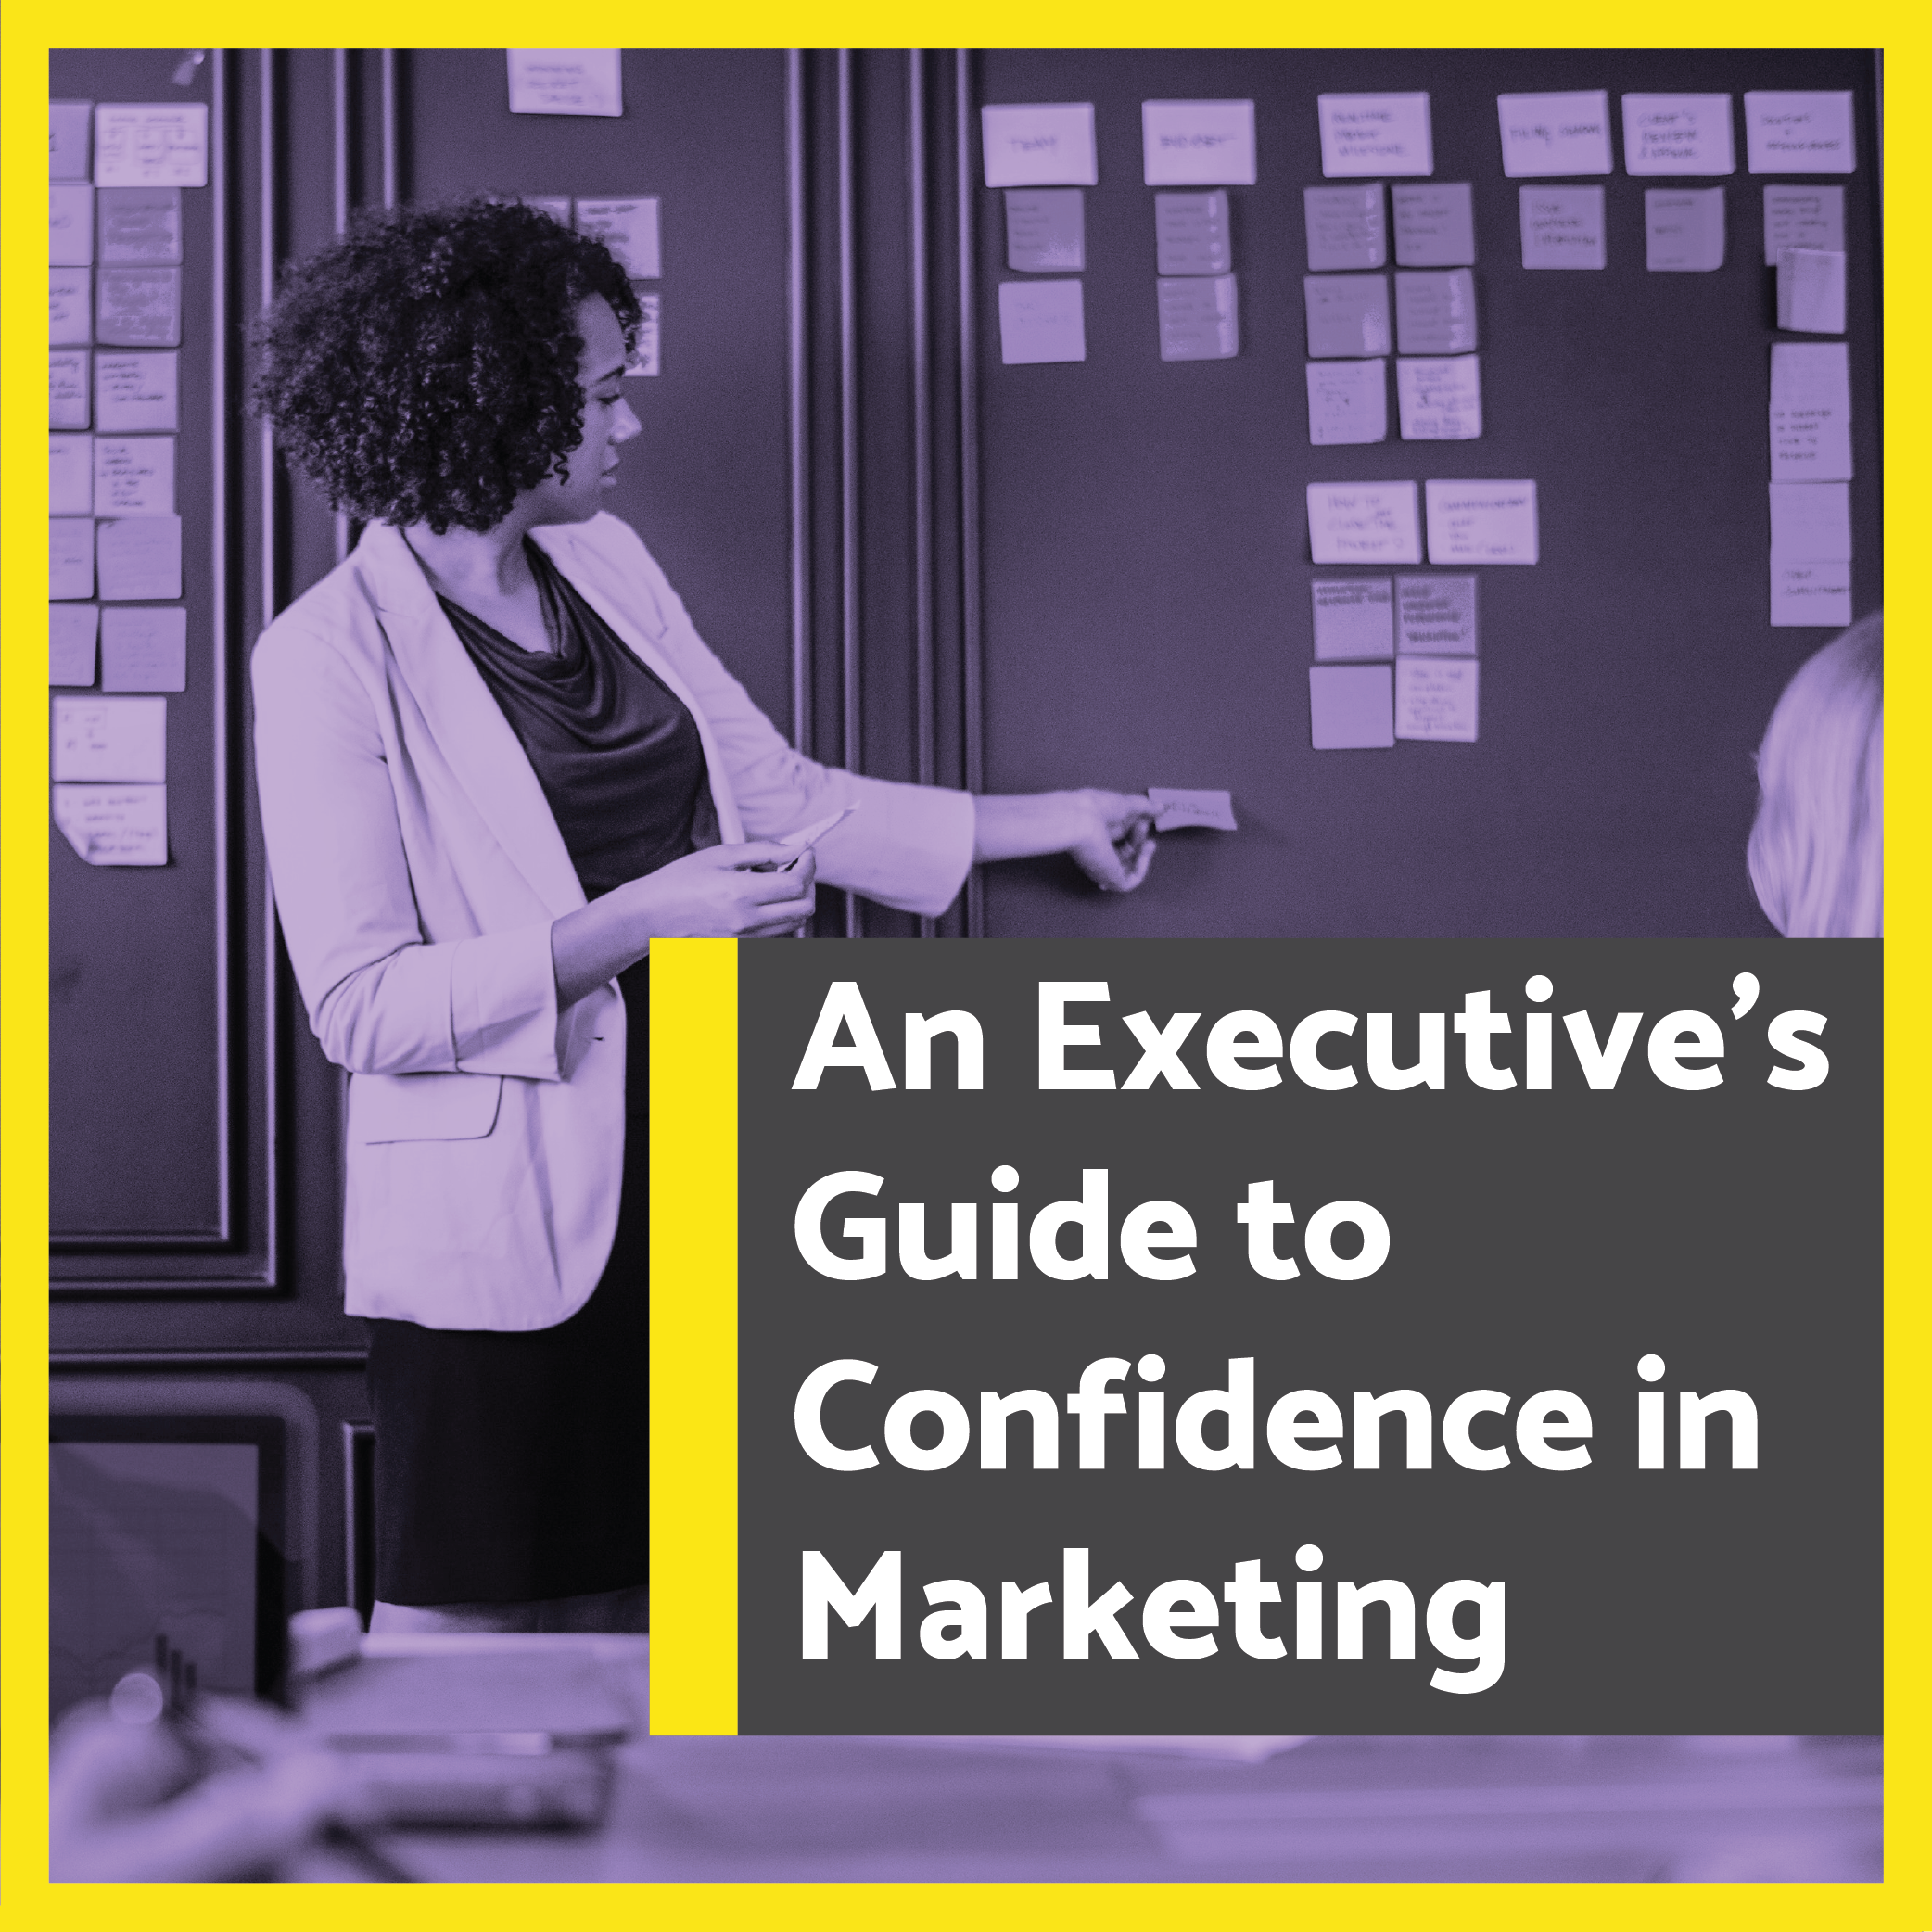 An Executive’s Guide to Confidence in Marketing